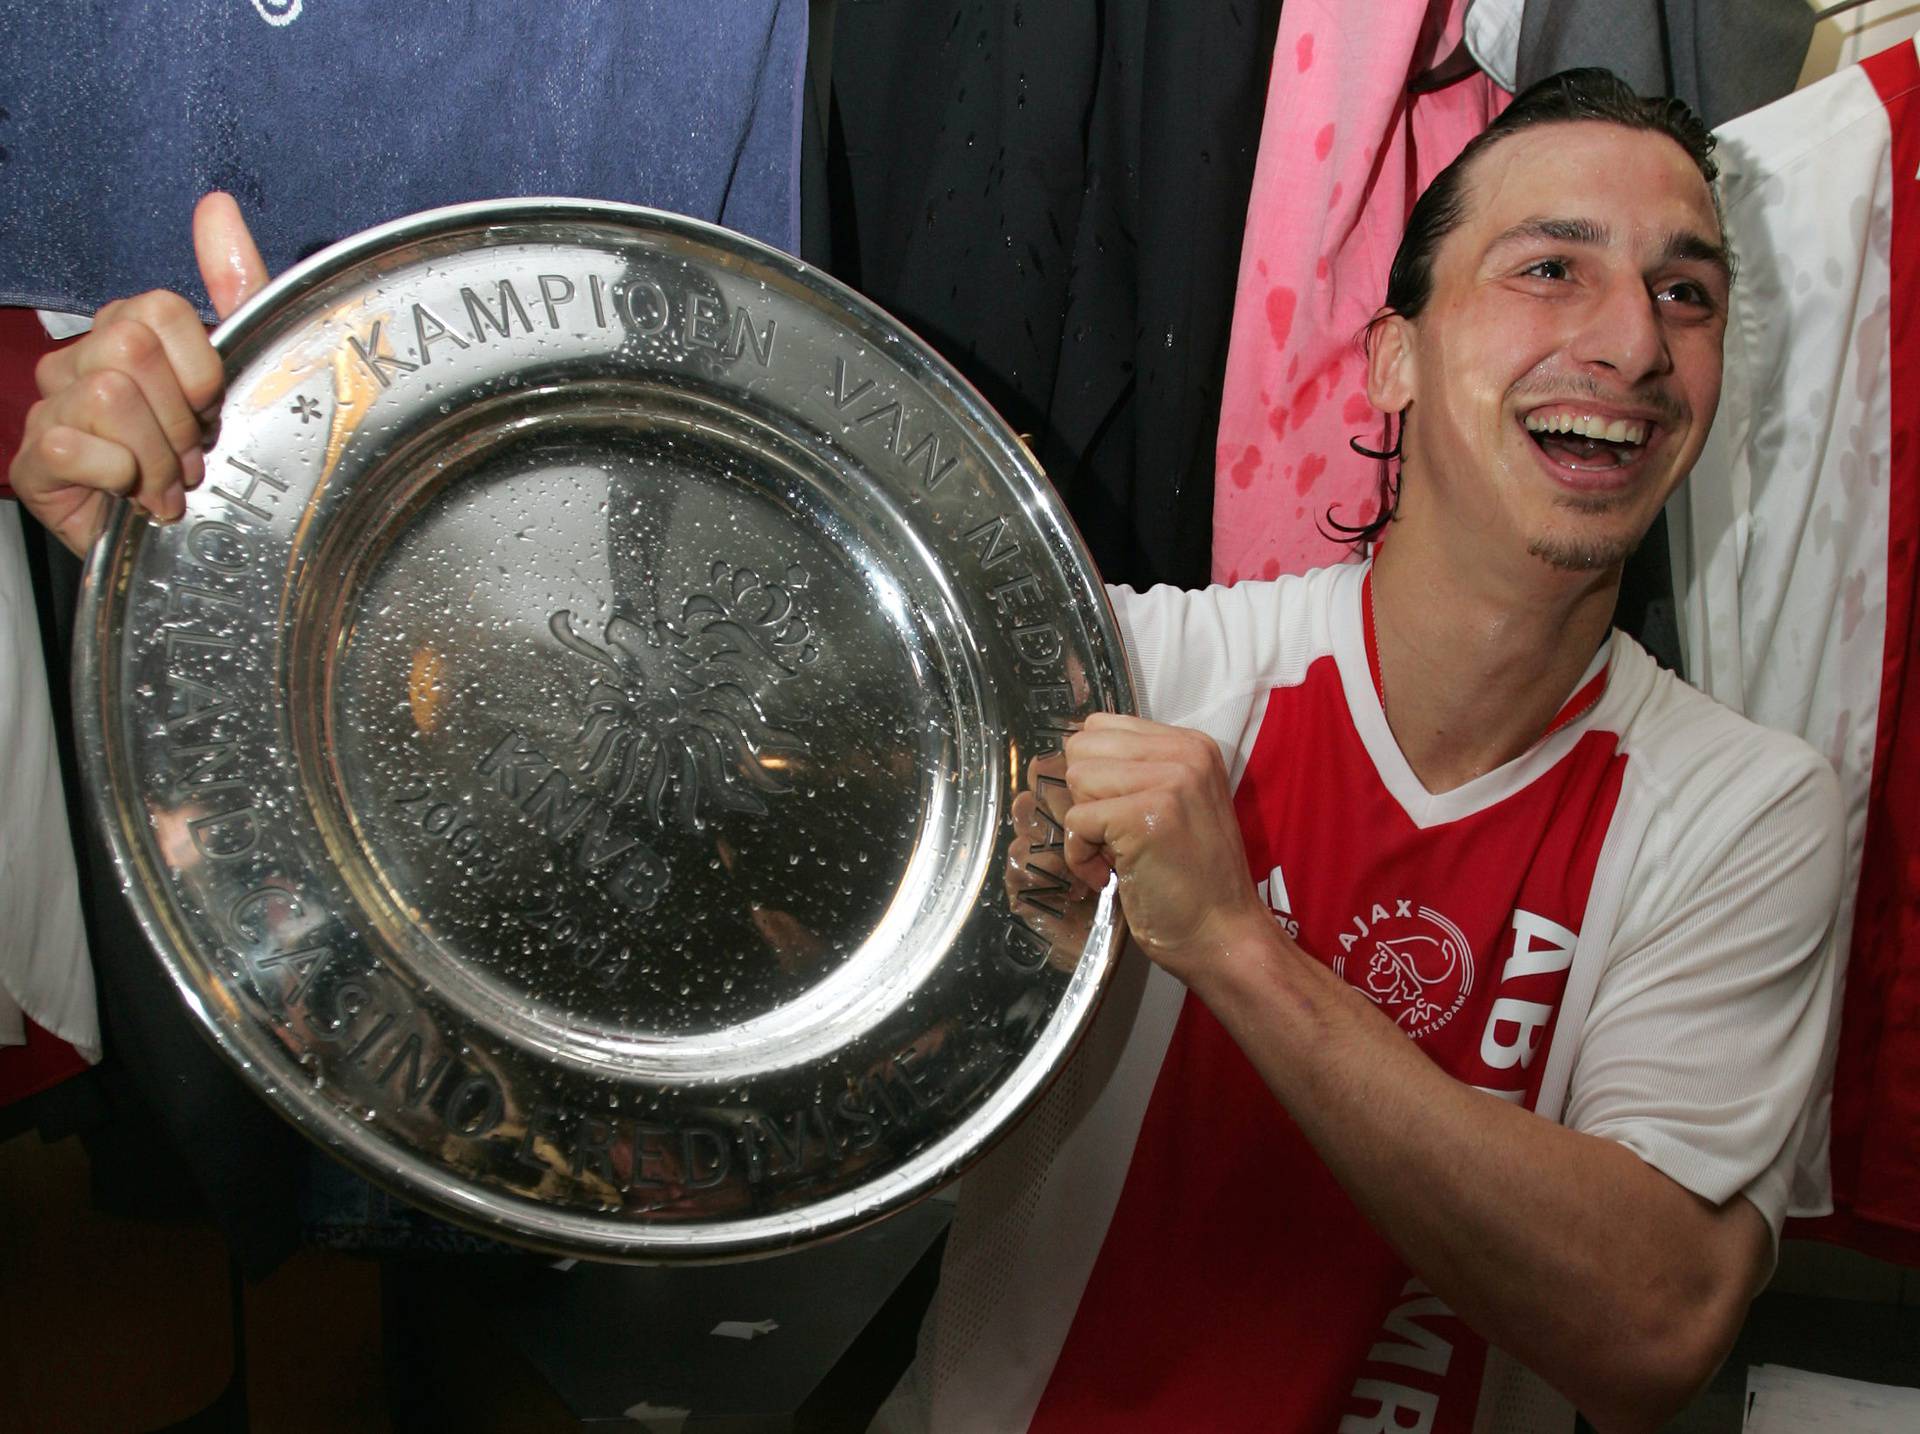 FILE PHOTO: Ajax striker Zlatan Ibrahimovic holds the Dutch Eredivisie trophy after a 2-0 victory against NAC Breda in Amsterdam.